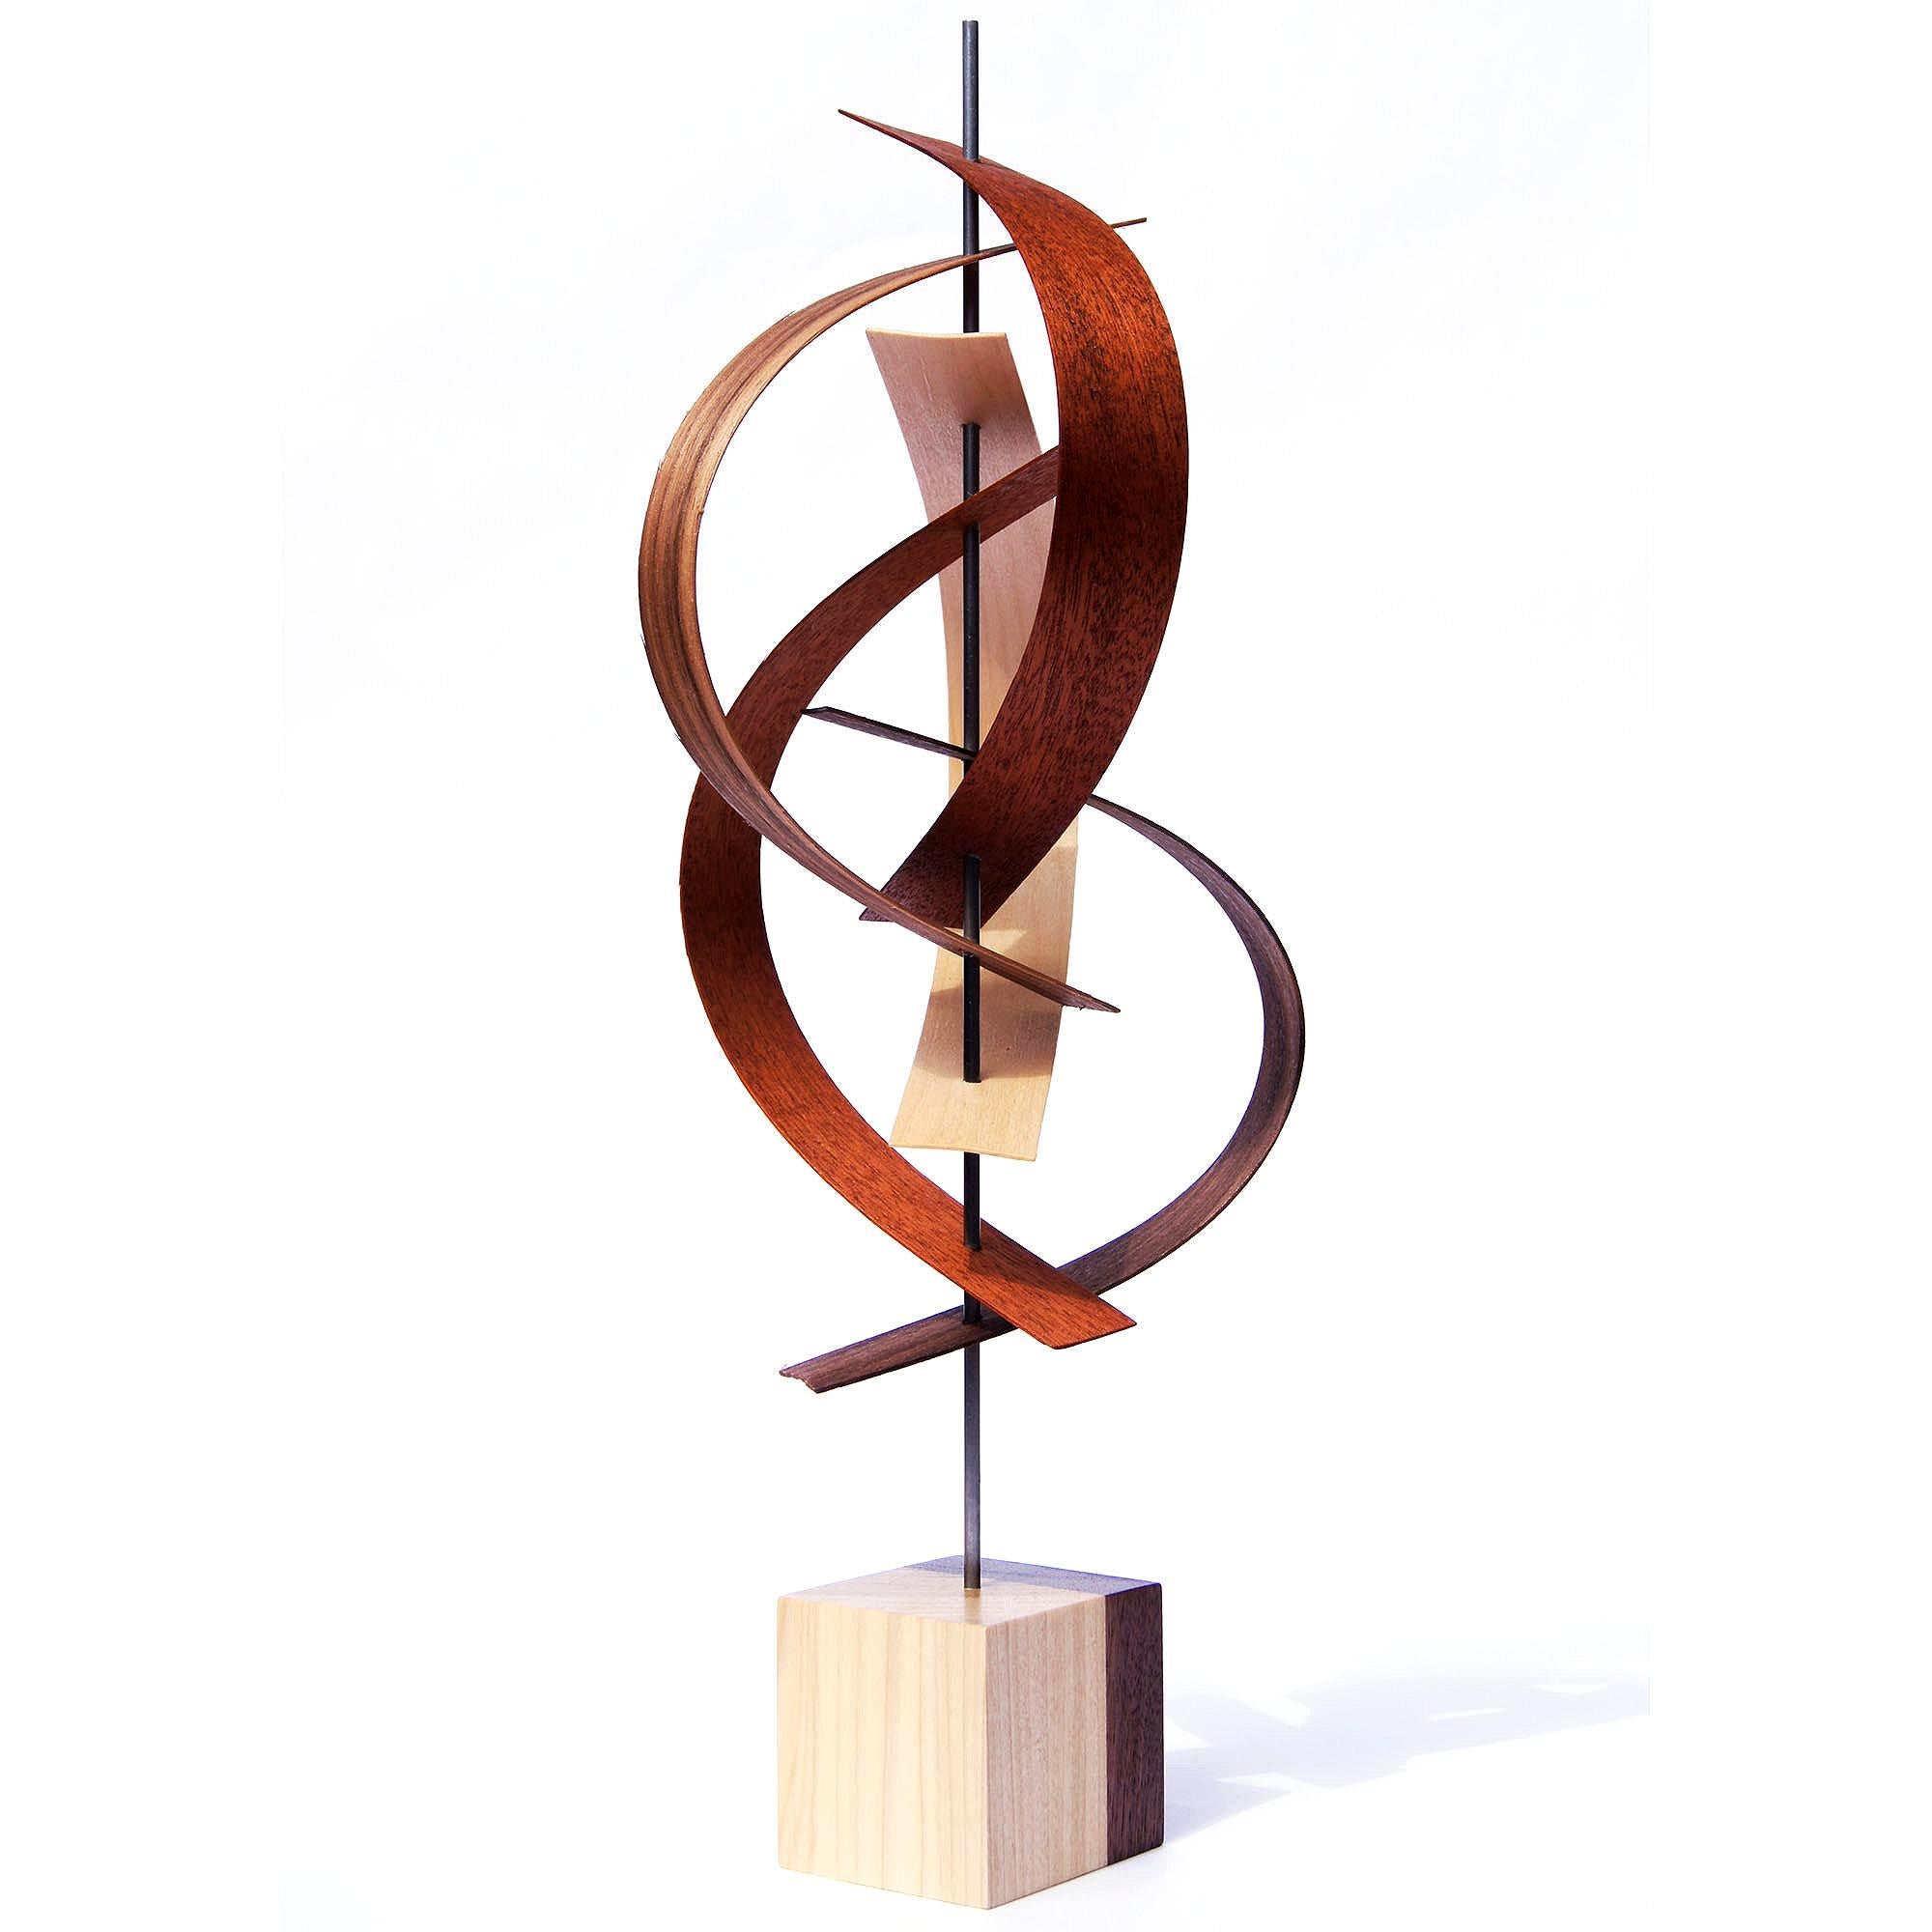 Mid-Century Modern Inspired, Original, Contemporary, Wood Sculpture by Jeff L.